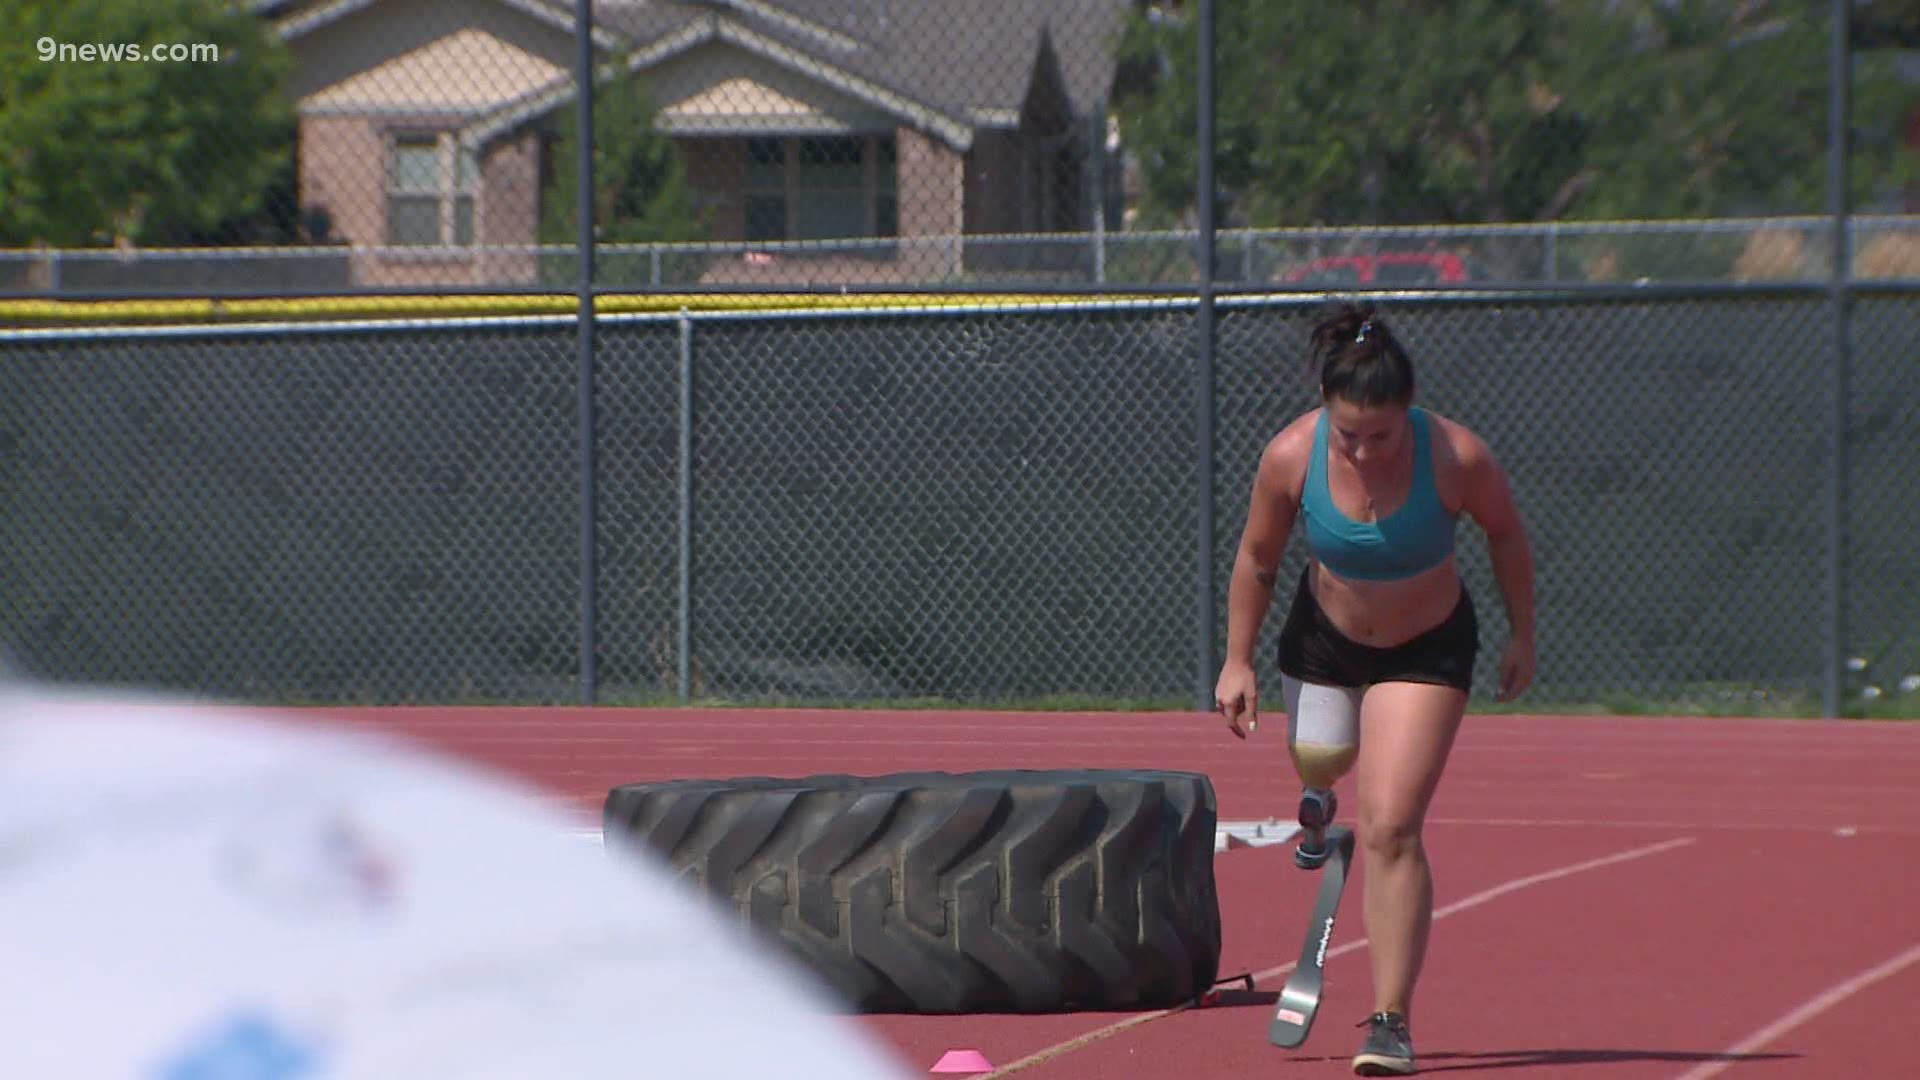 Paralympian Lacey Henderson, who was set to compete in Tokyo this summer, is adapting and showing us how to stay tough in this week's Warrior Way.